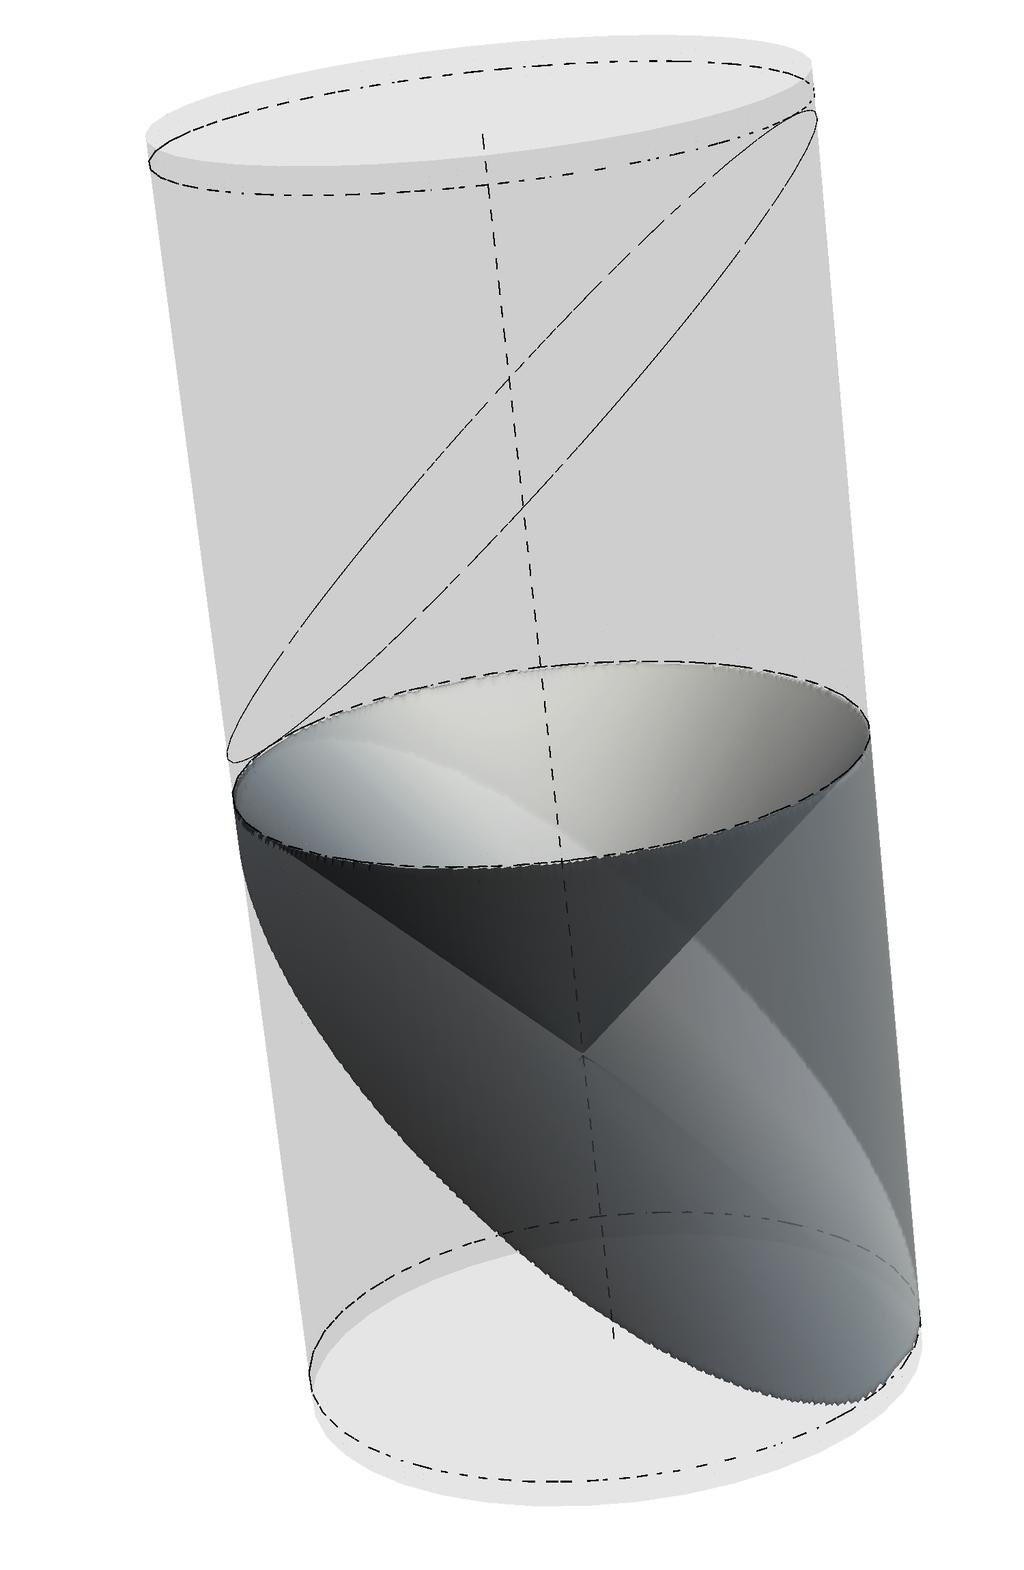 Penrose Diagrams Global AdS cylinder; ds slice coordinate region is bounded from above by lightcone running downward from t=0, and from below by slanted ellipse, also marking lower boundary of